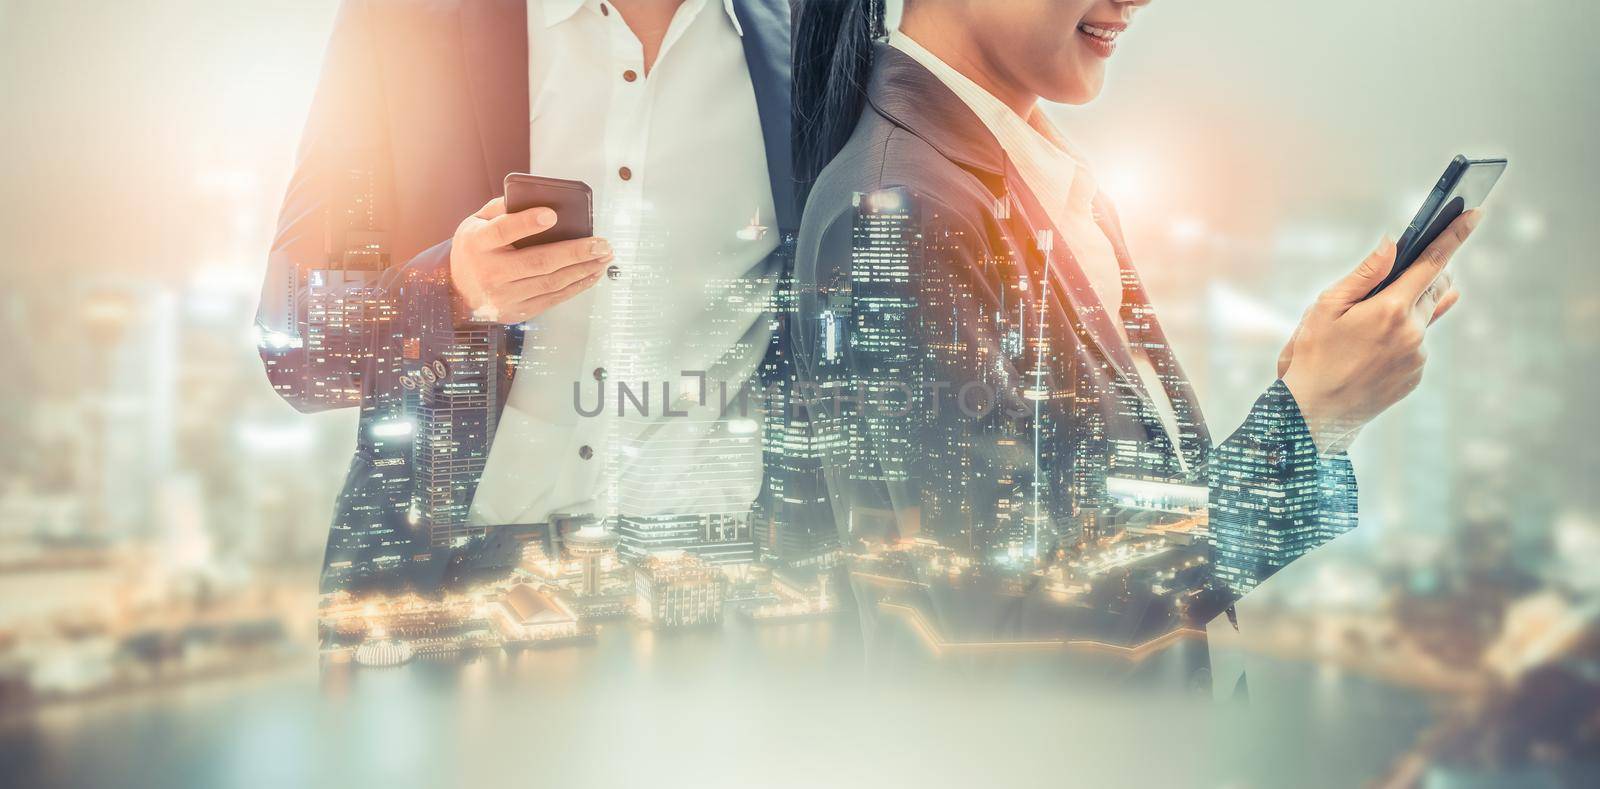 Young business people using mobile phone with modern city buildings background. Future telecommunication technology and internet of things ( IOT ) concept.